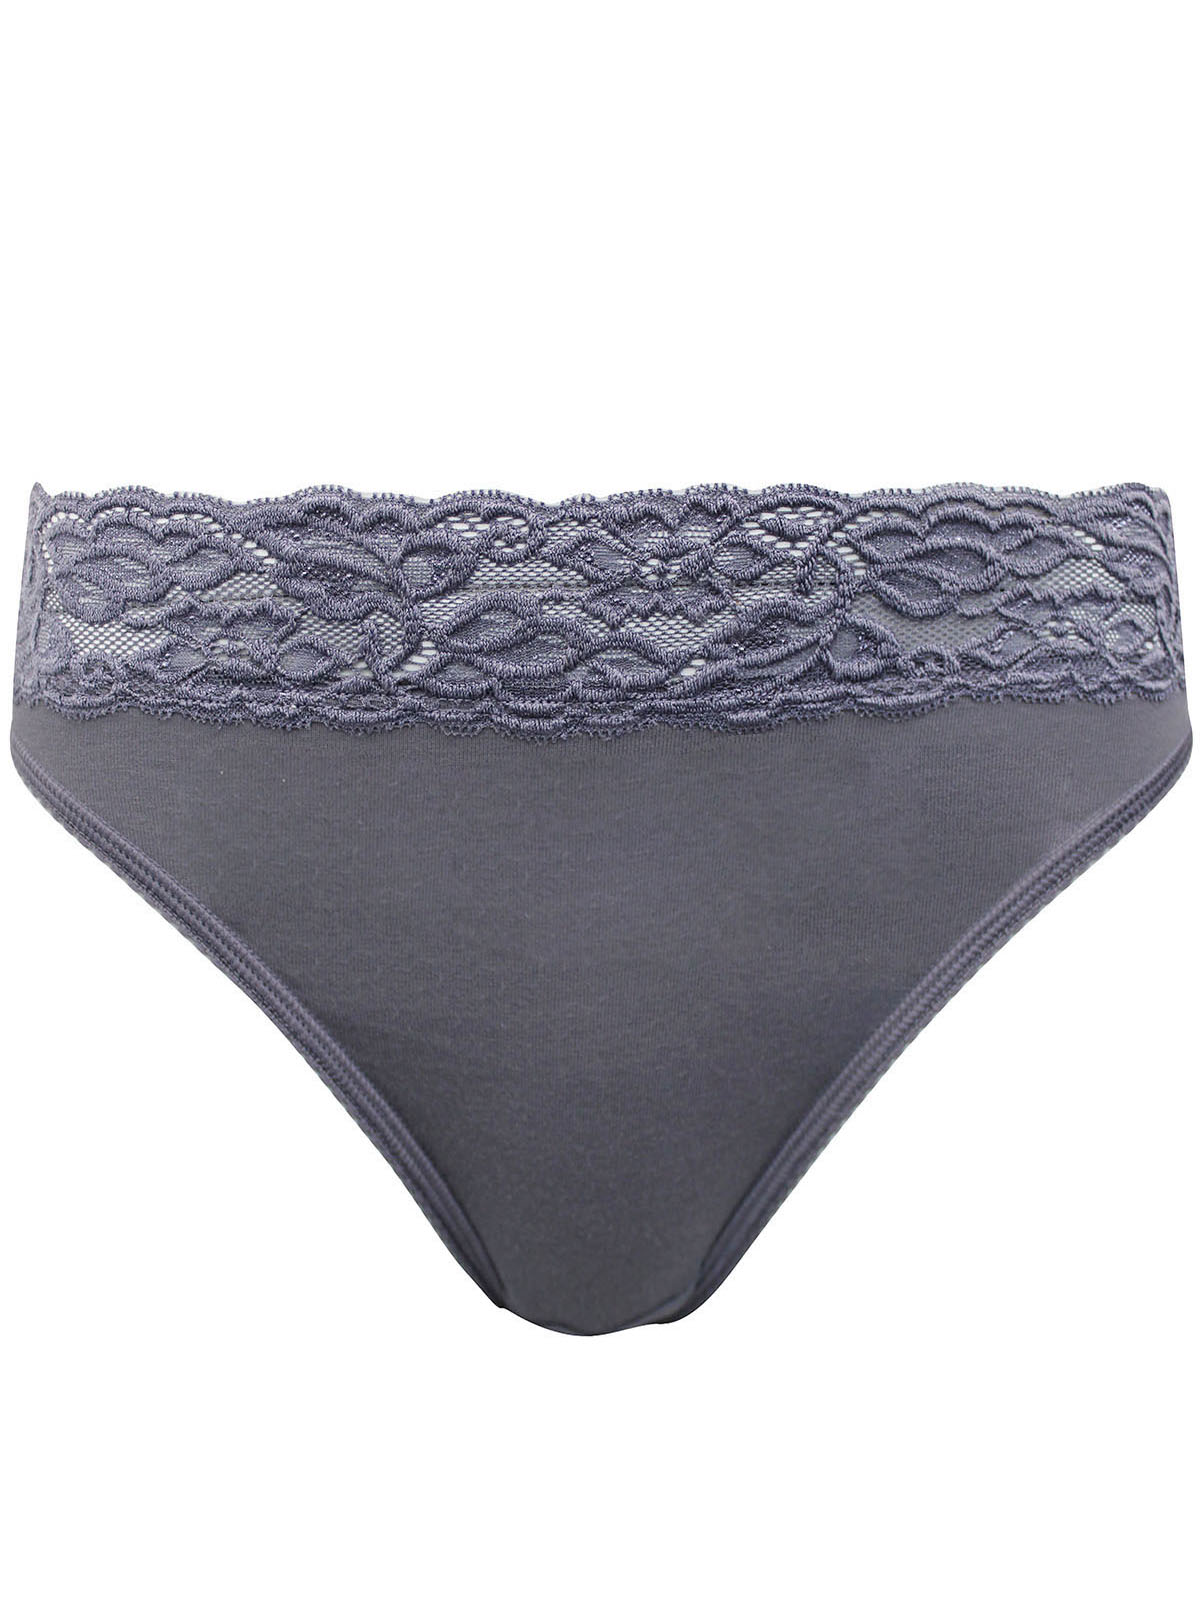  - - GREY Cotton Rich Lace High Leg Knickers - Size 8 to 22